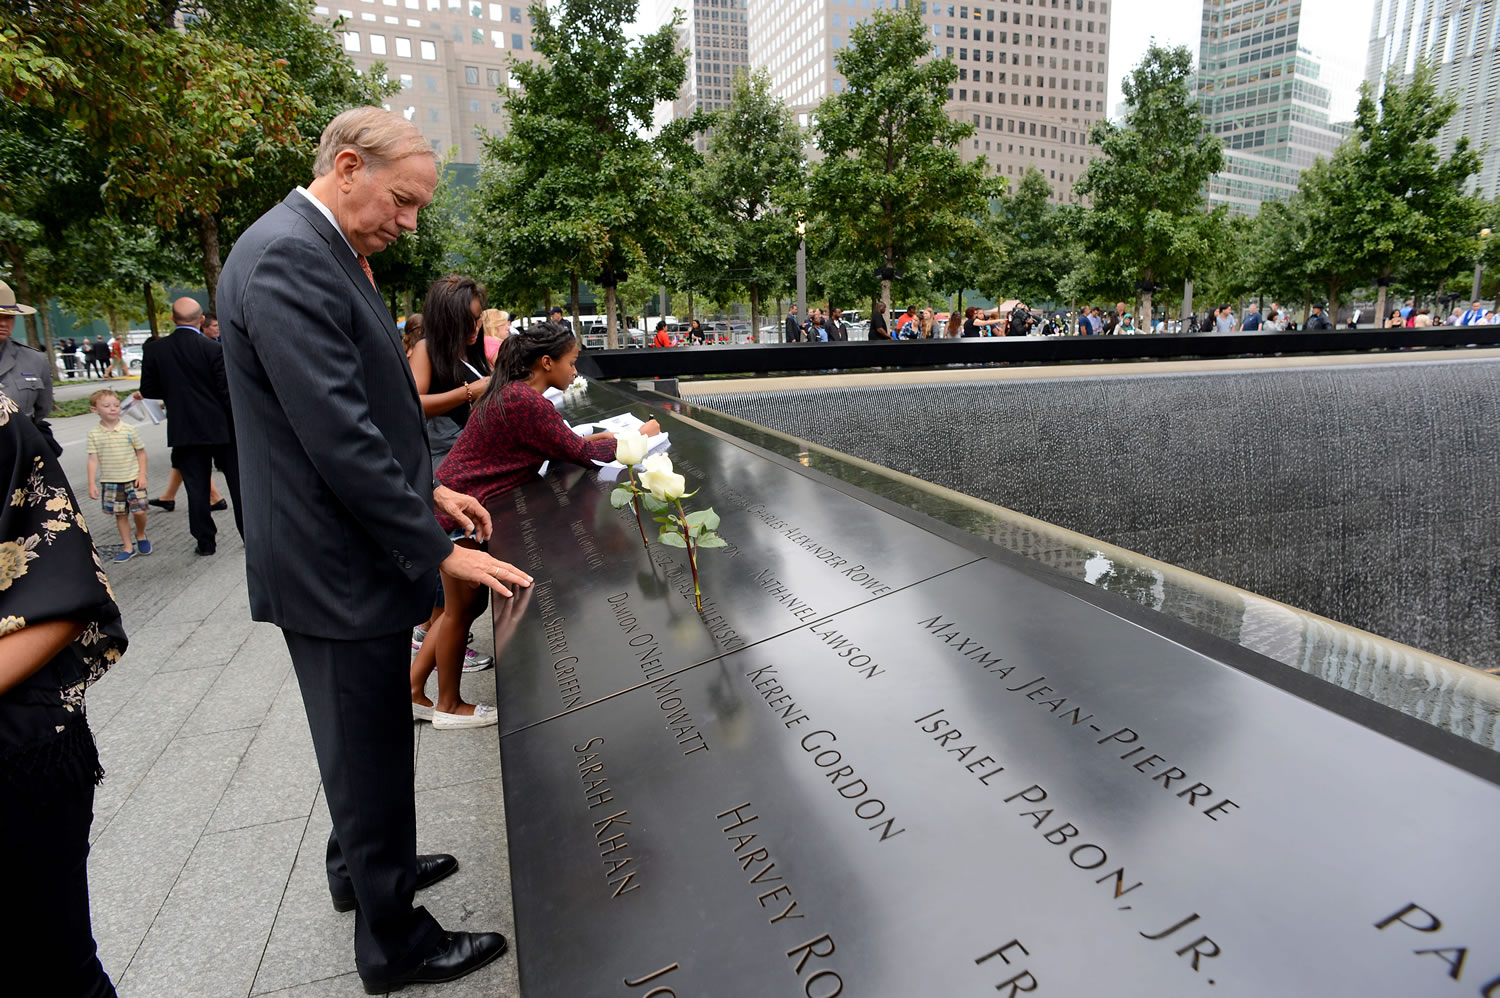 Former New York Gov. George Pataki visits the North Pool during memorial observances Thursday on the 13th anniversary of the Sept. 11 terror attacks on the World Trade Center in New York.